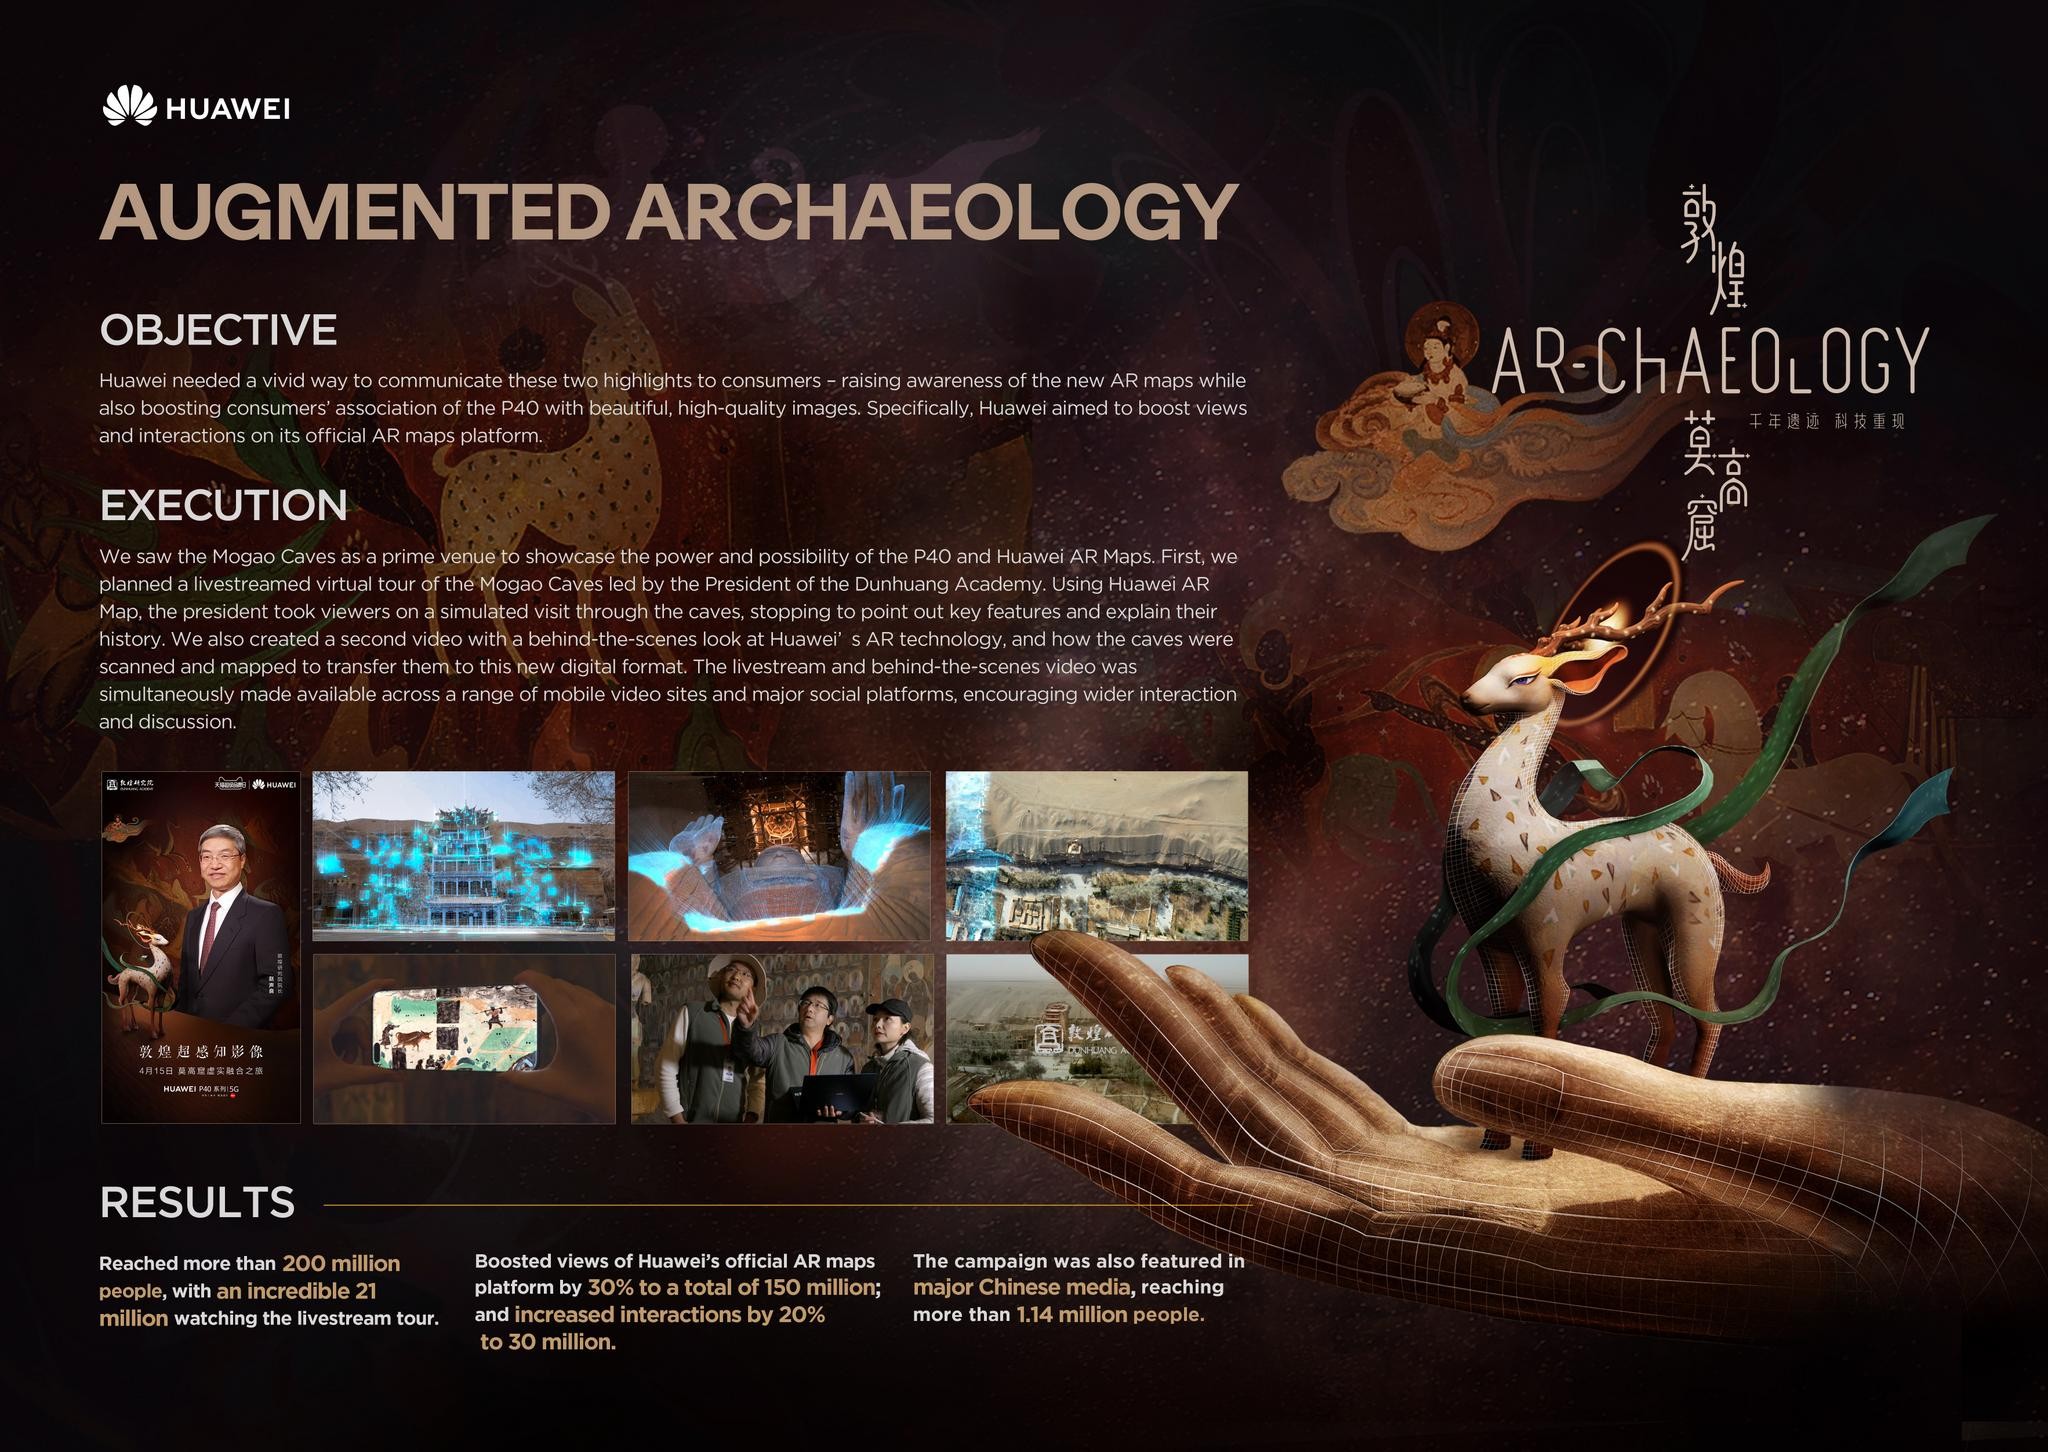 Augmented Archaeology